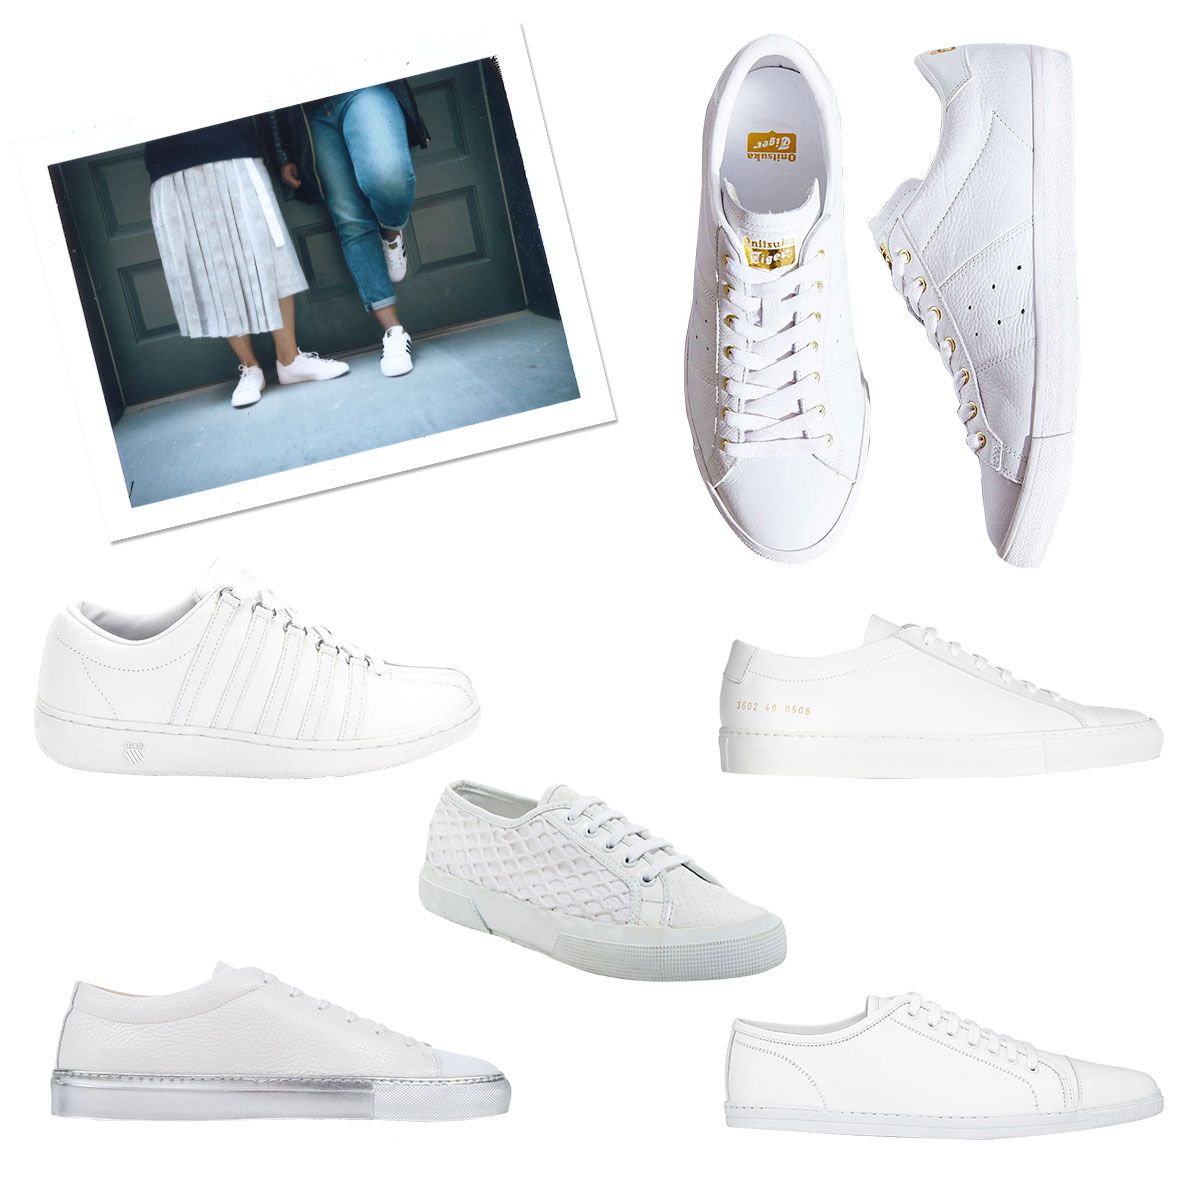 the White Sneaker Trend Over